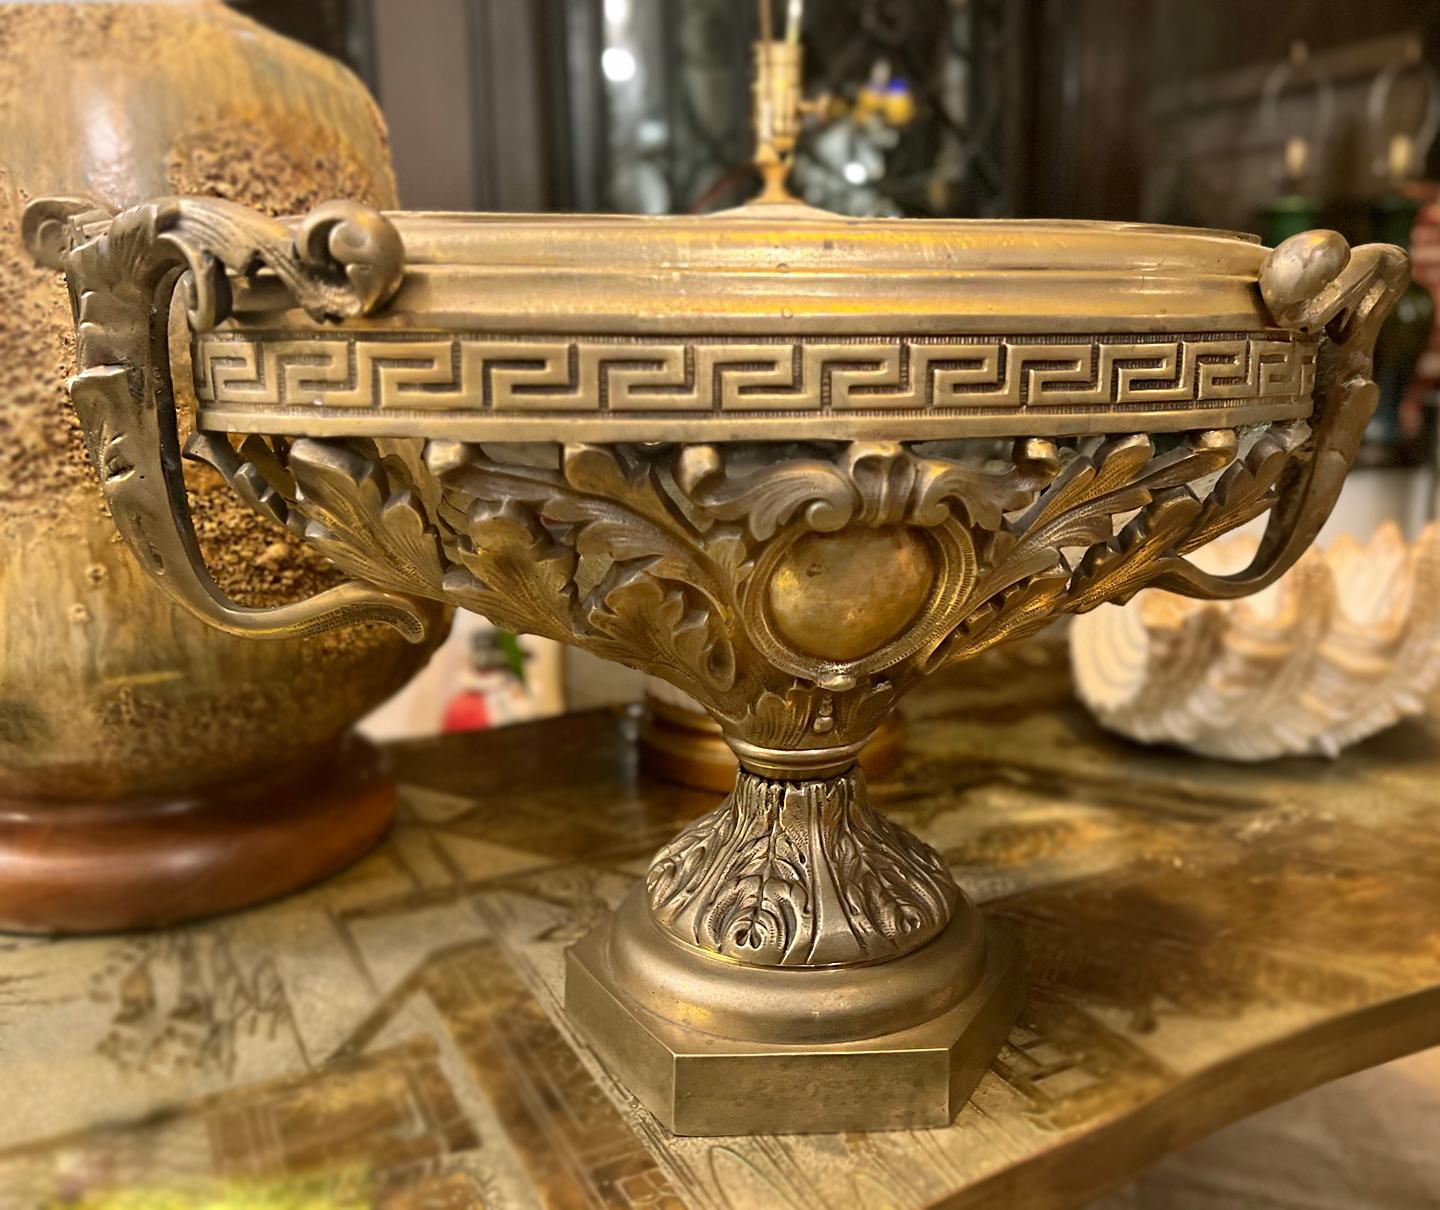 Set of circa 1900's three French bronze cachepots.
Measurements:
Large :
Height of body: 12.75″
Length: 21″
Width: 8